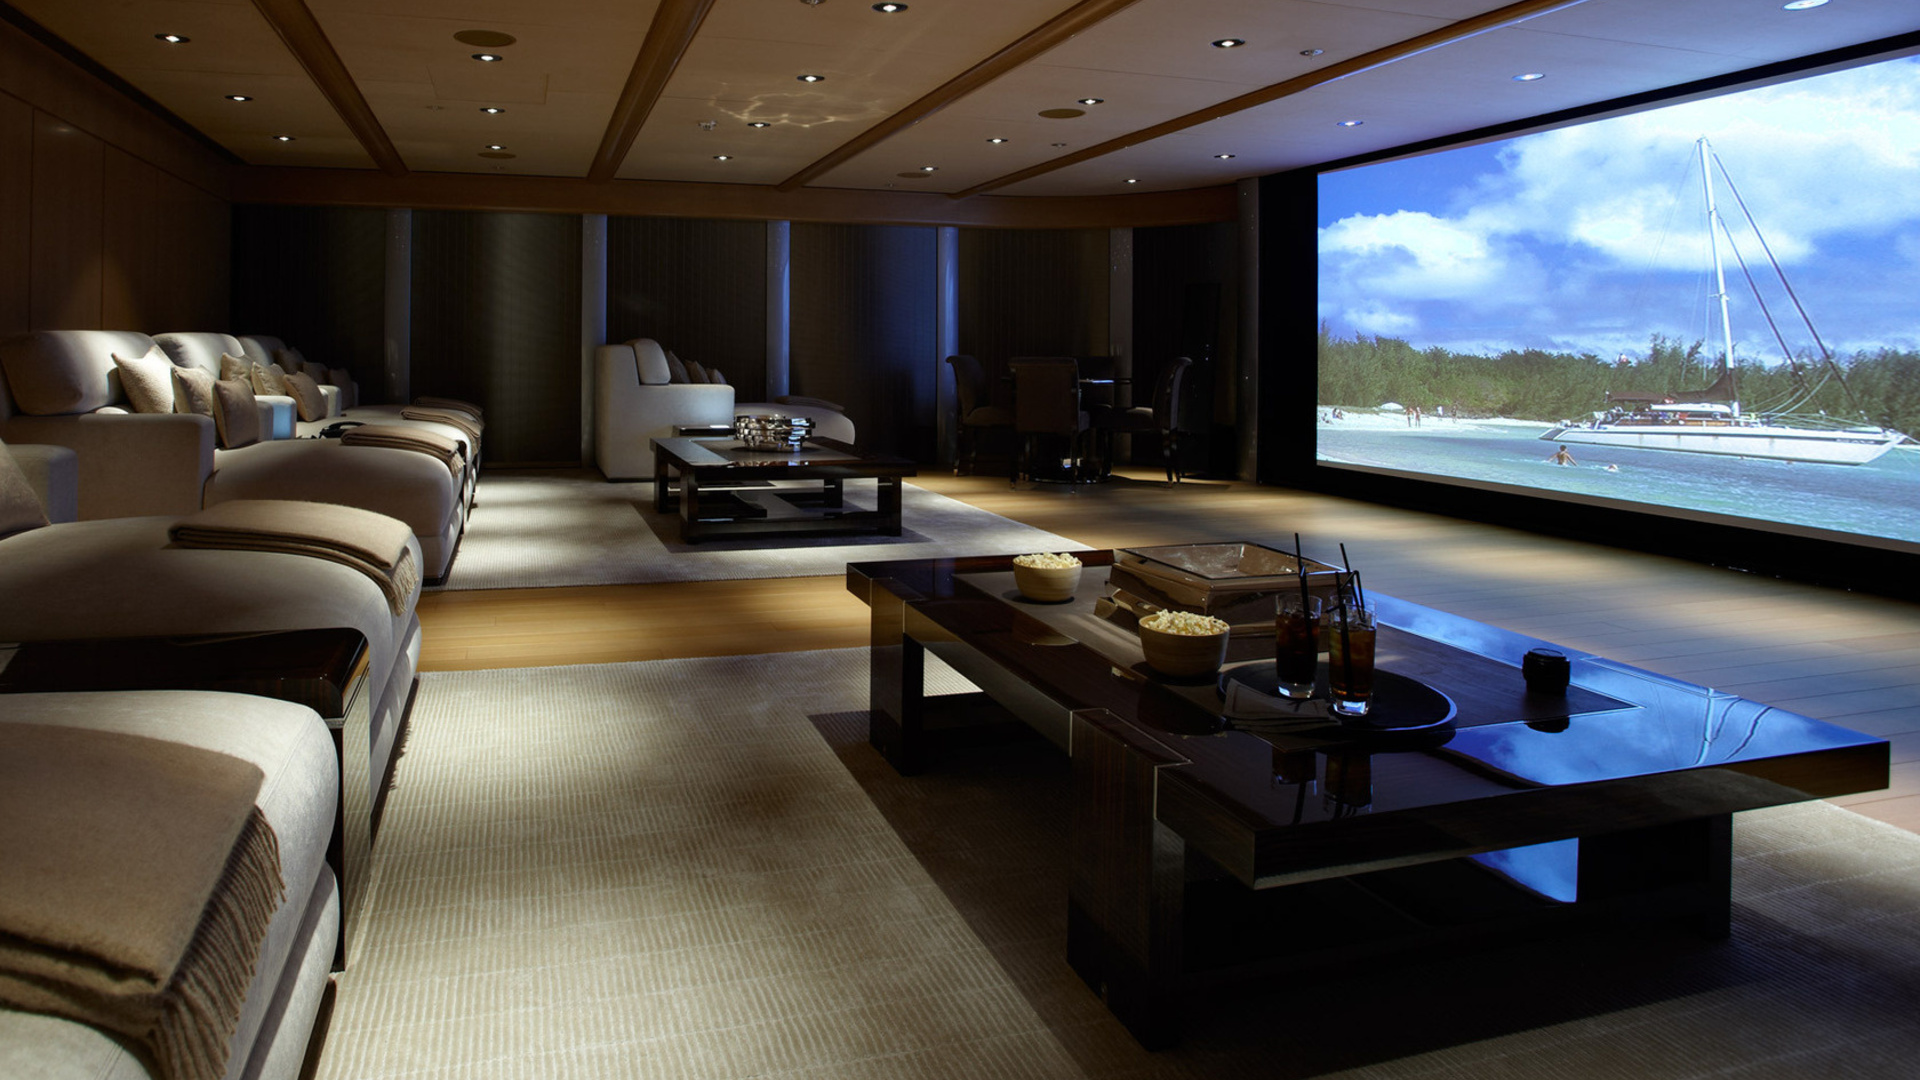 Living Room Theatre: The Ultimate Home Cinema Experience